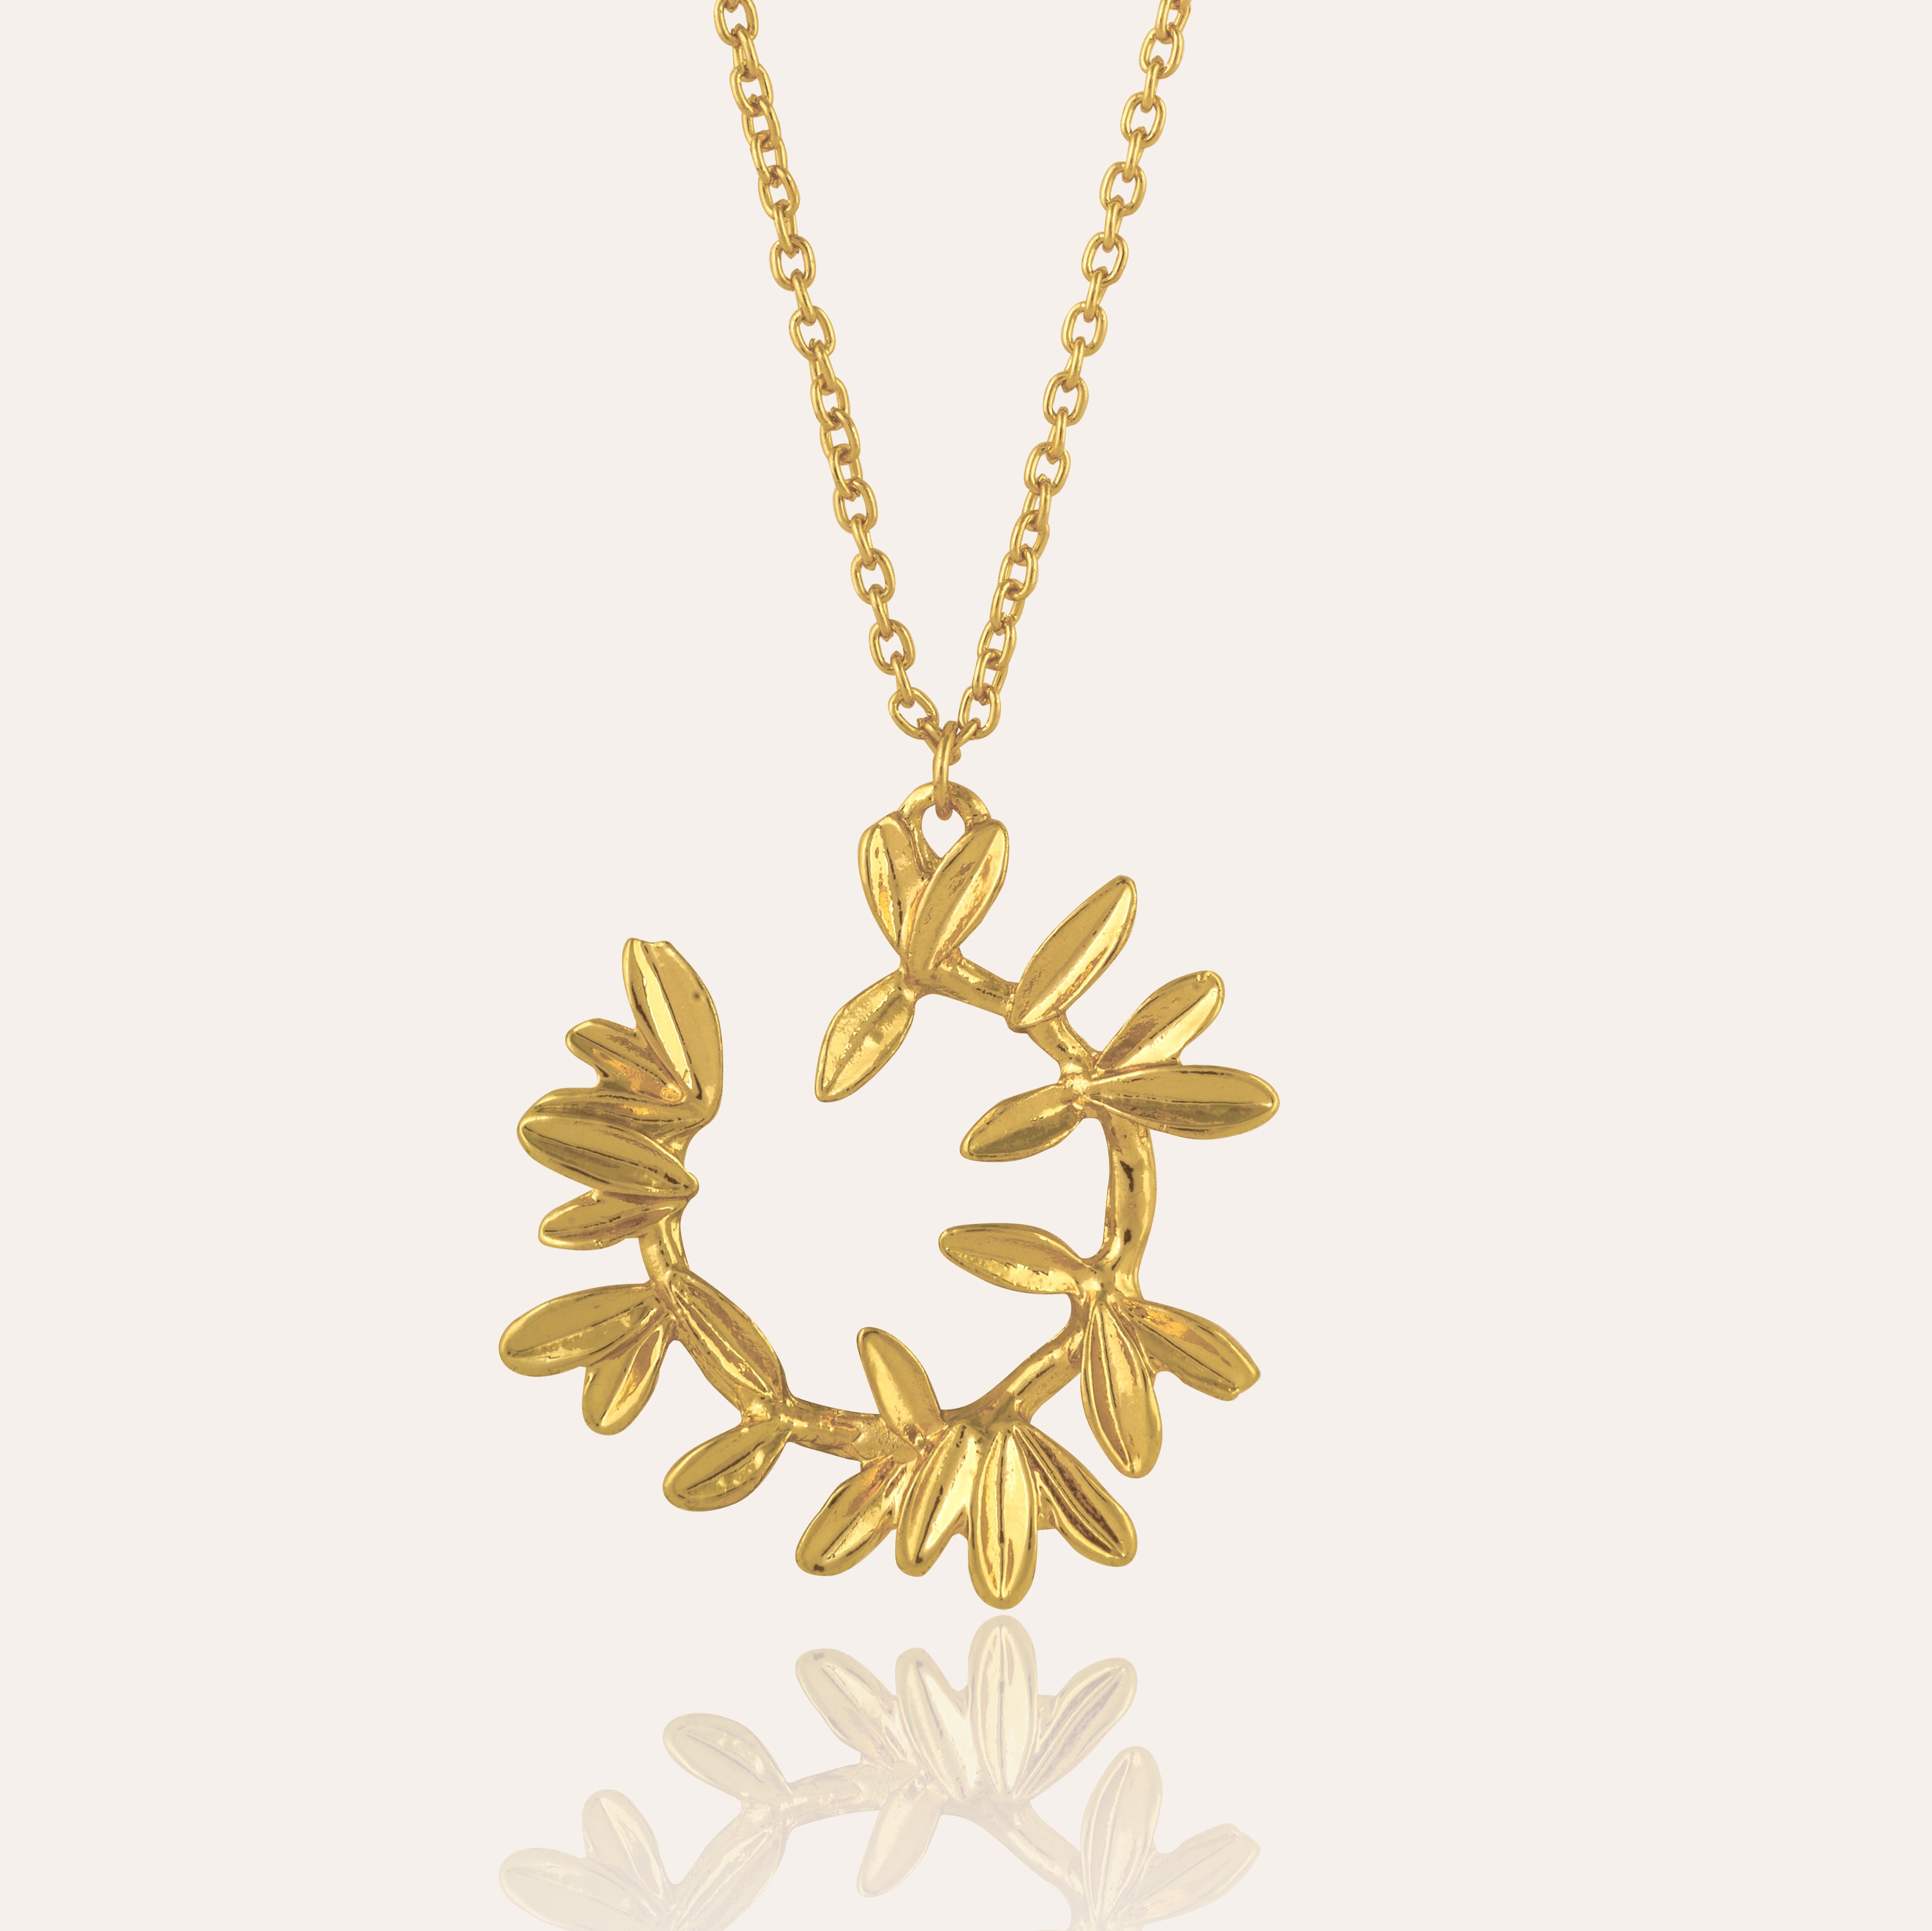 TFC Golden Leaves Gold Plated Pendant Necklace-Enhance your elegance with our collection of gold-plated necklaces for women. Choose from stunning pendant necklaces, chic choker necklaces, and trendy layered necklaces. Our sleek and dainty designs are both affordable and anti-tarnish, ensuring lasting beauty. Enjoy the cheapest fashion jewellery, lightweight and stylish- only at The Fun Company